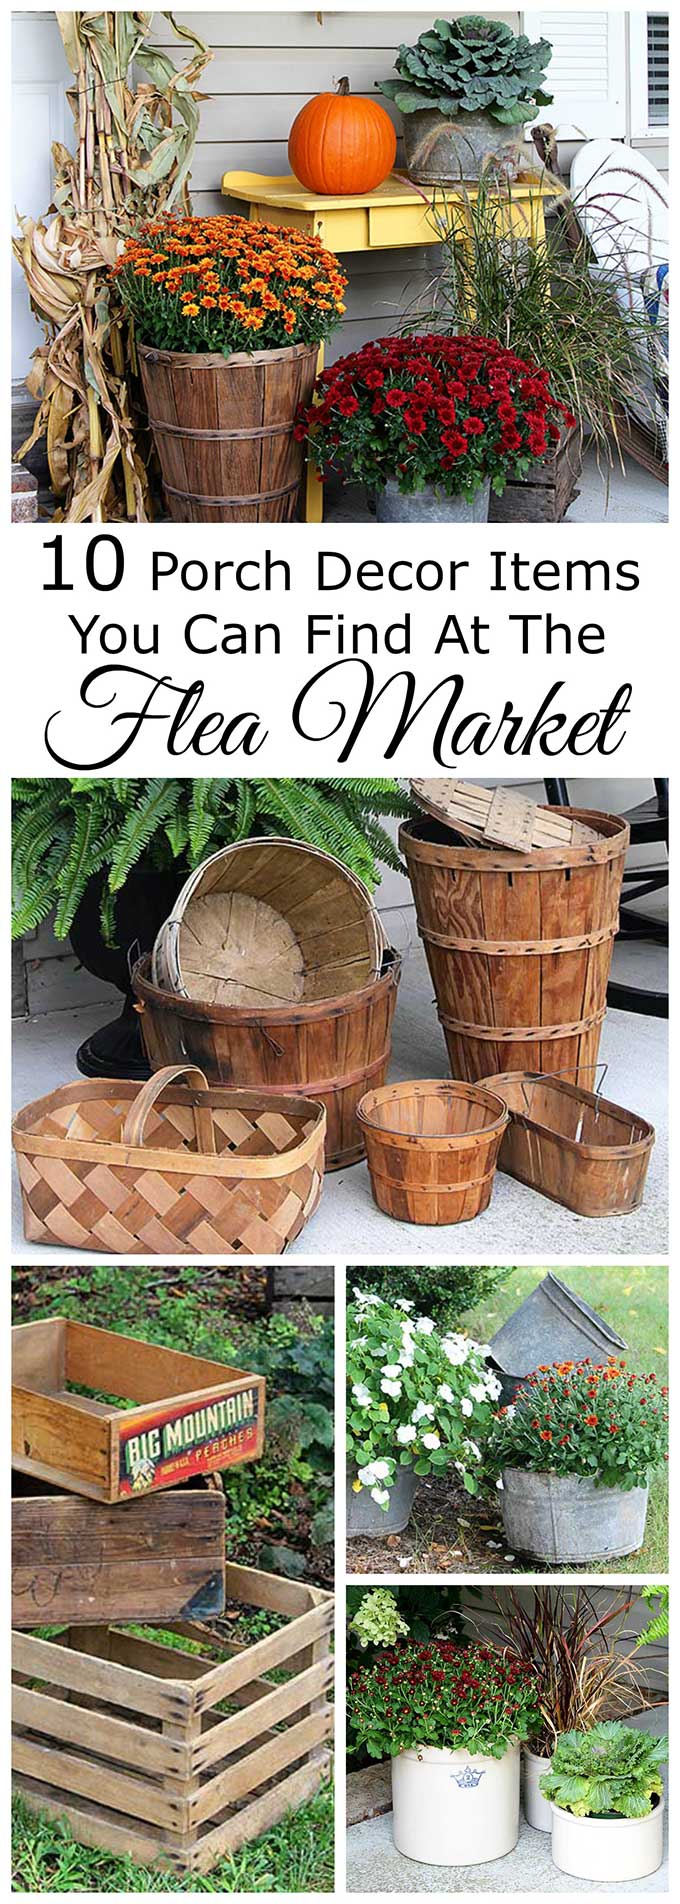 Some of the best fall porch decor can be found at flea markets, festivals, fairs, barn sales and estate sales. They are a great place to pick up inexpensive rustic farmhouse decor for the porch.